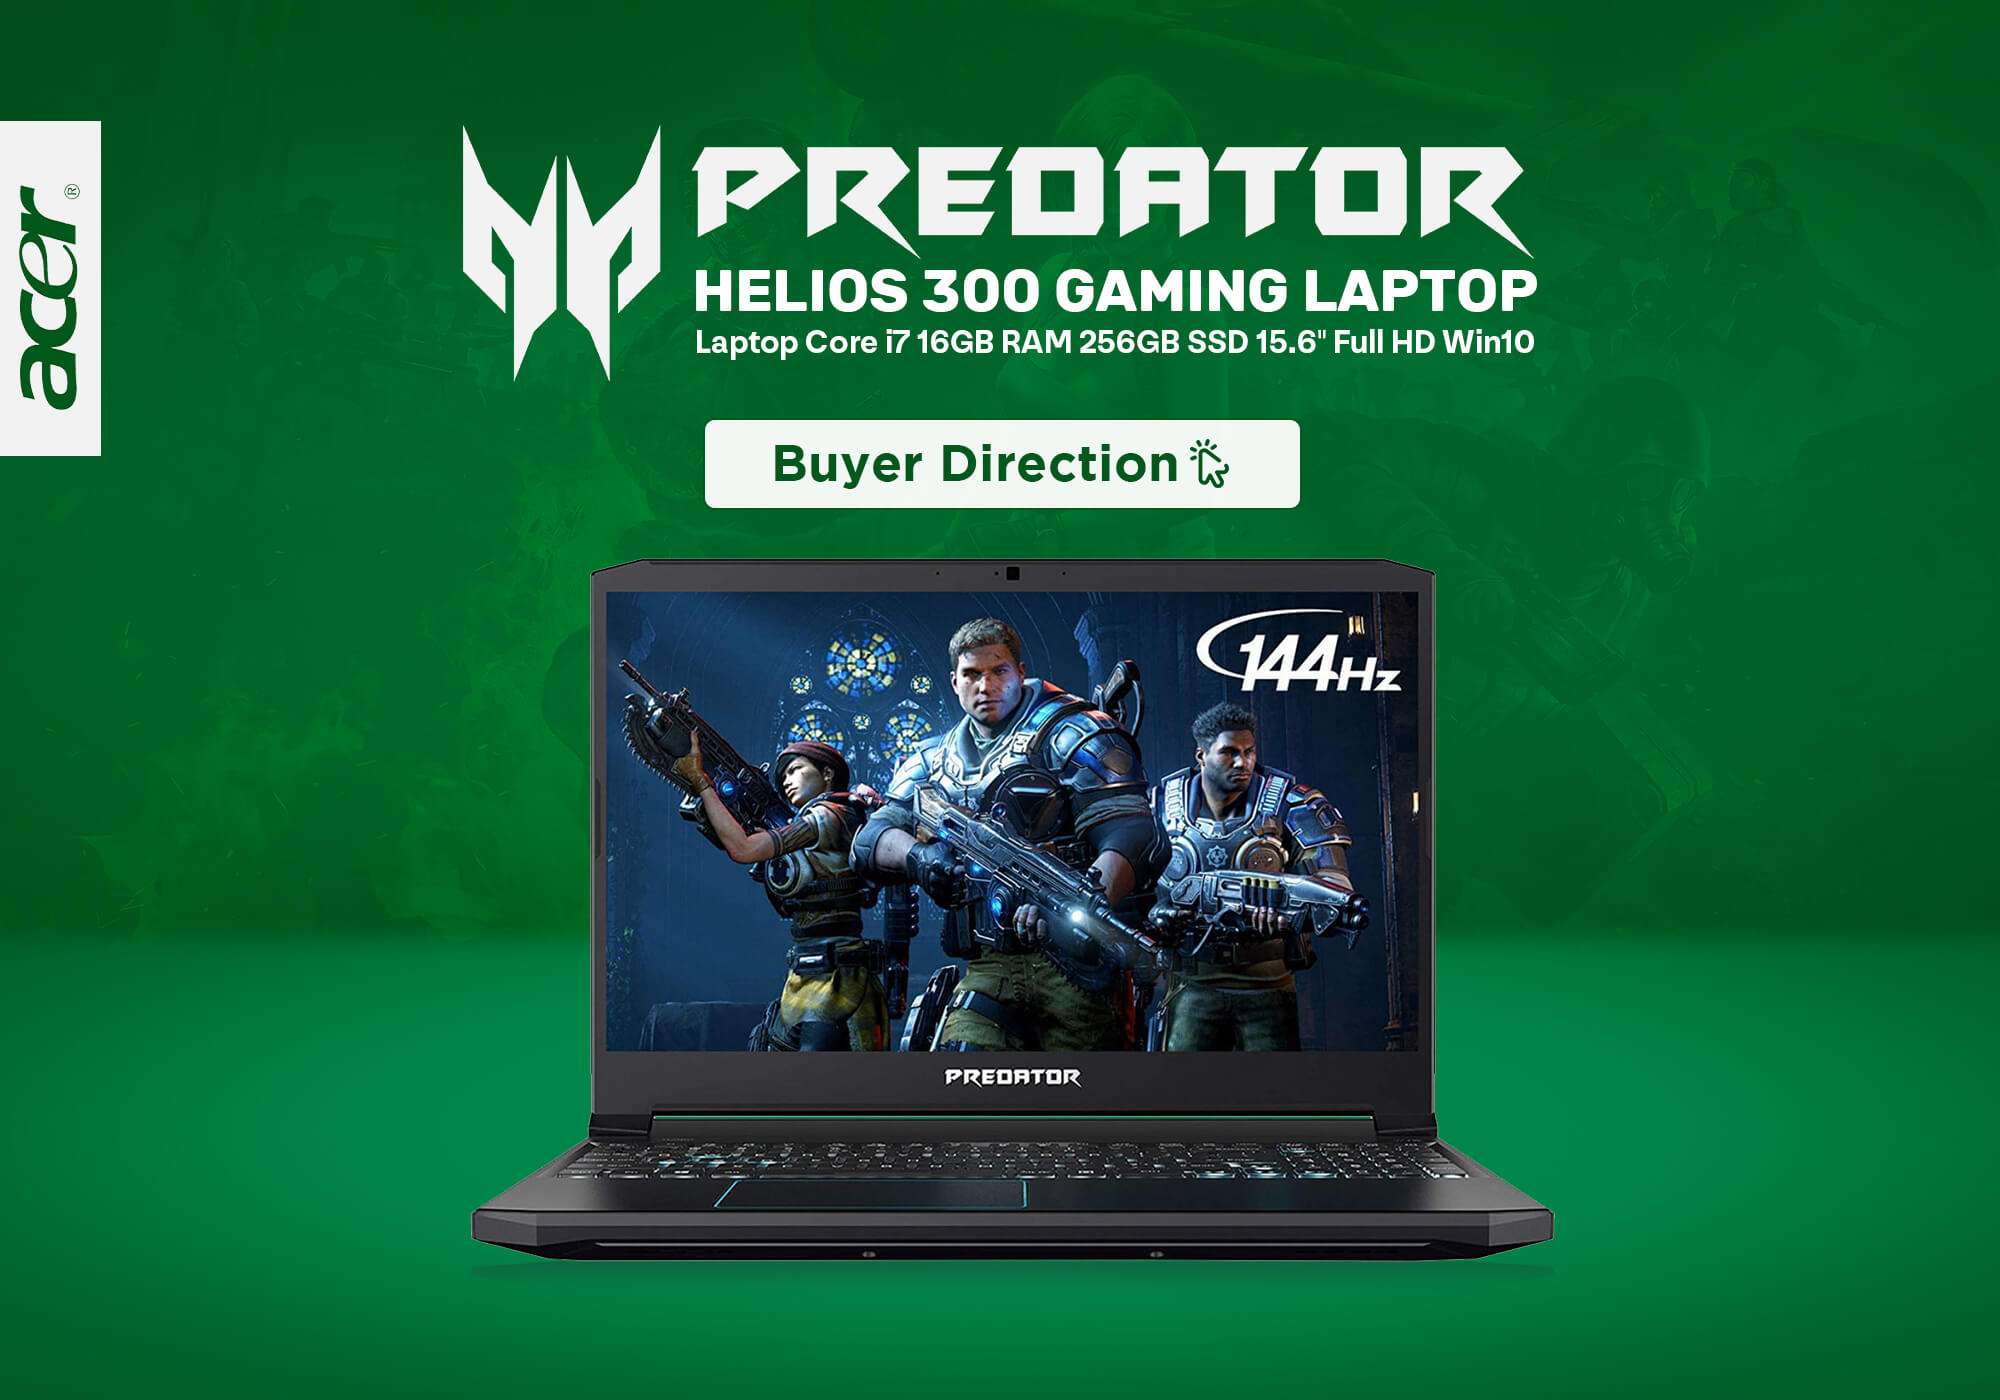 Review: Acer Predator Helios 300 Gaming Laptop 15.6" Intel Core i7